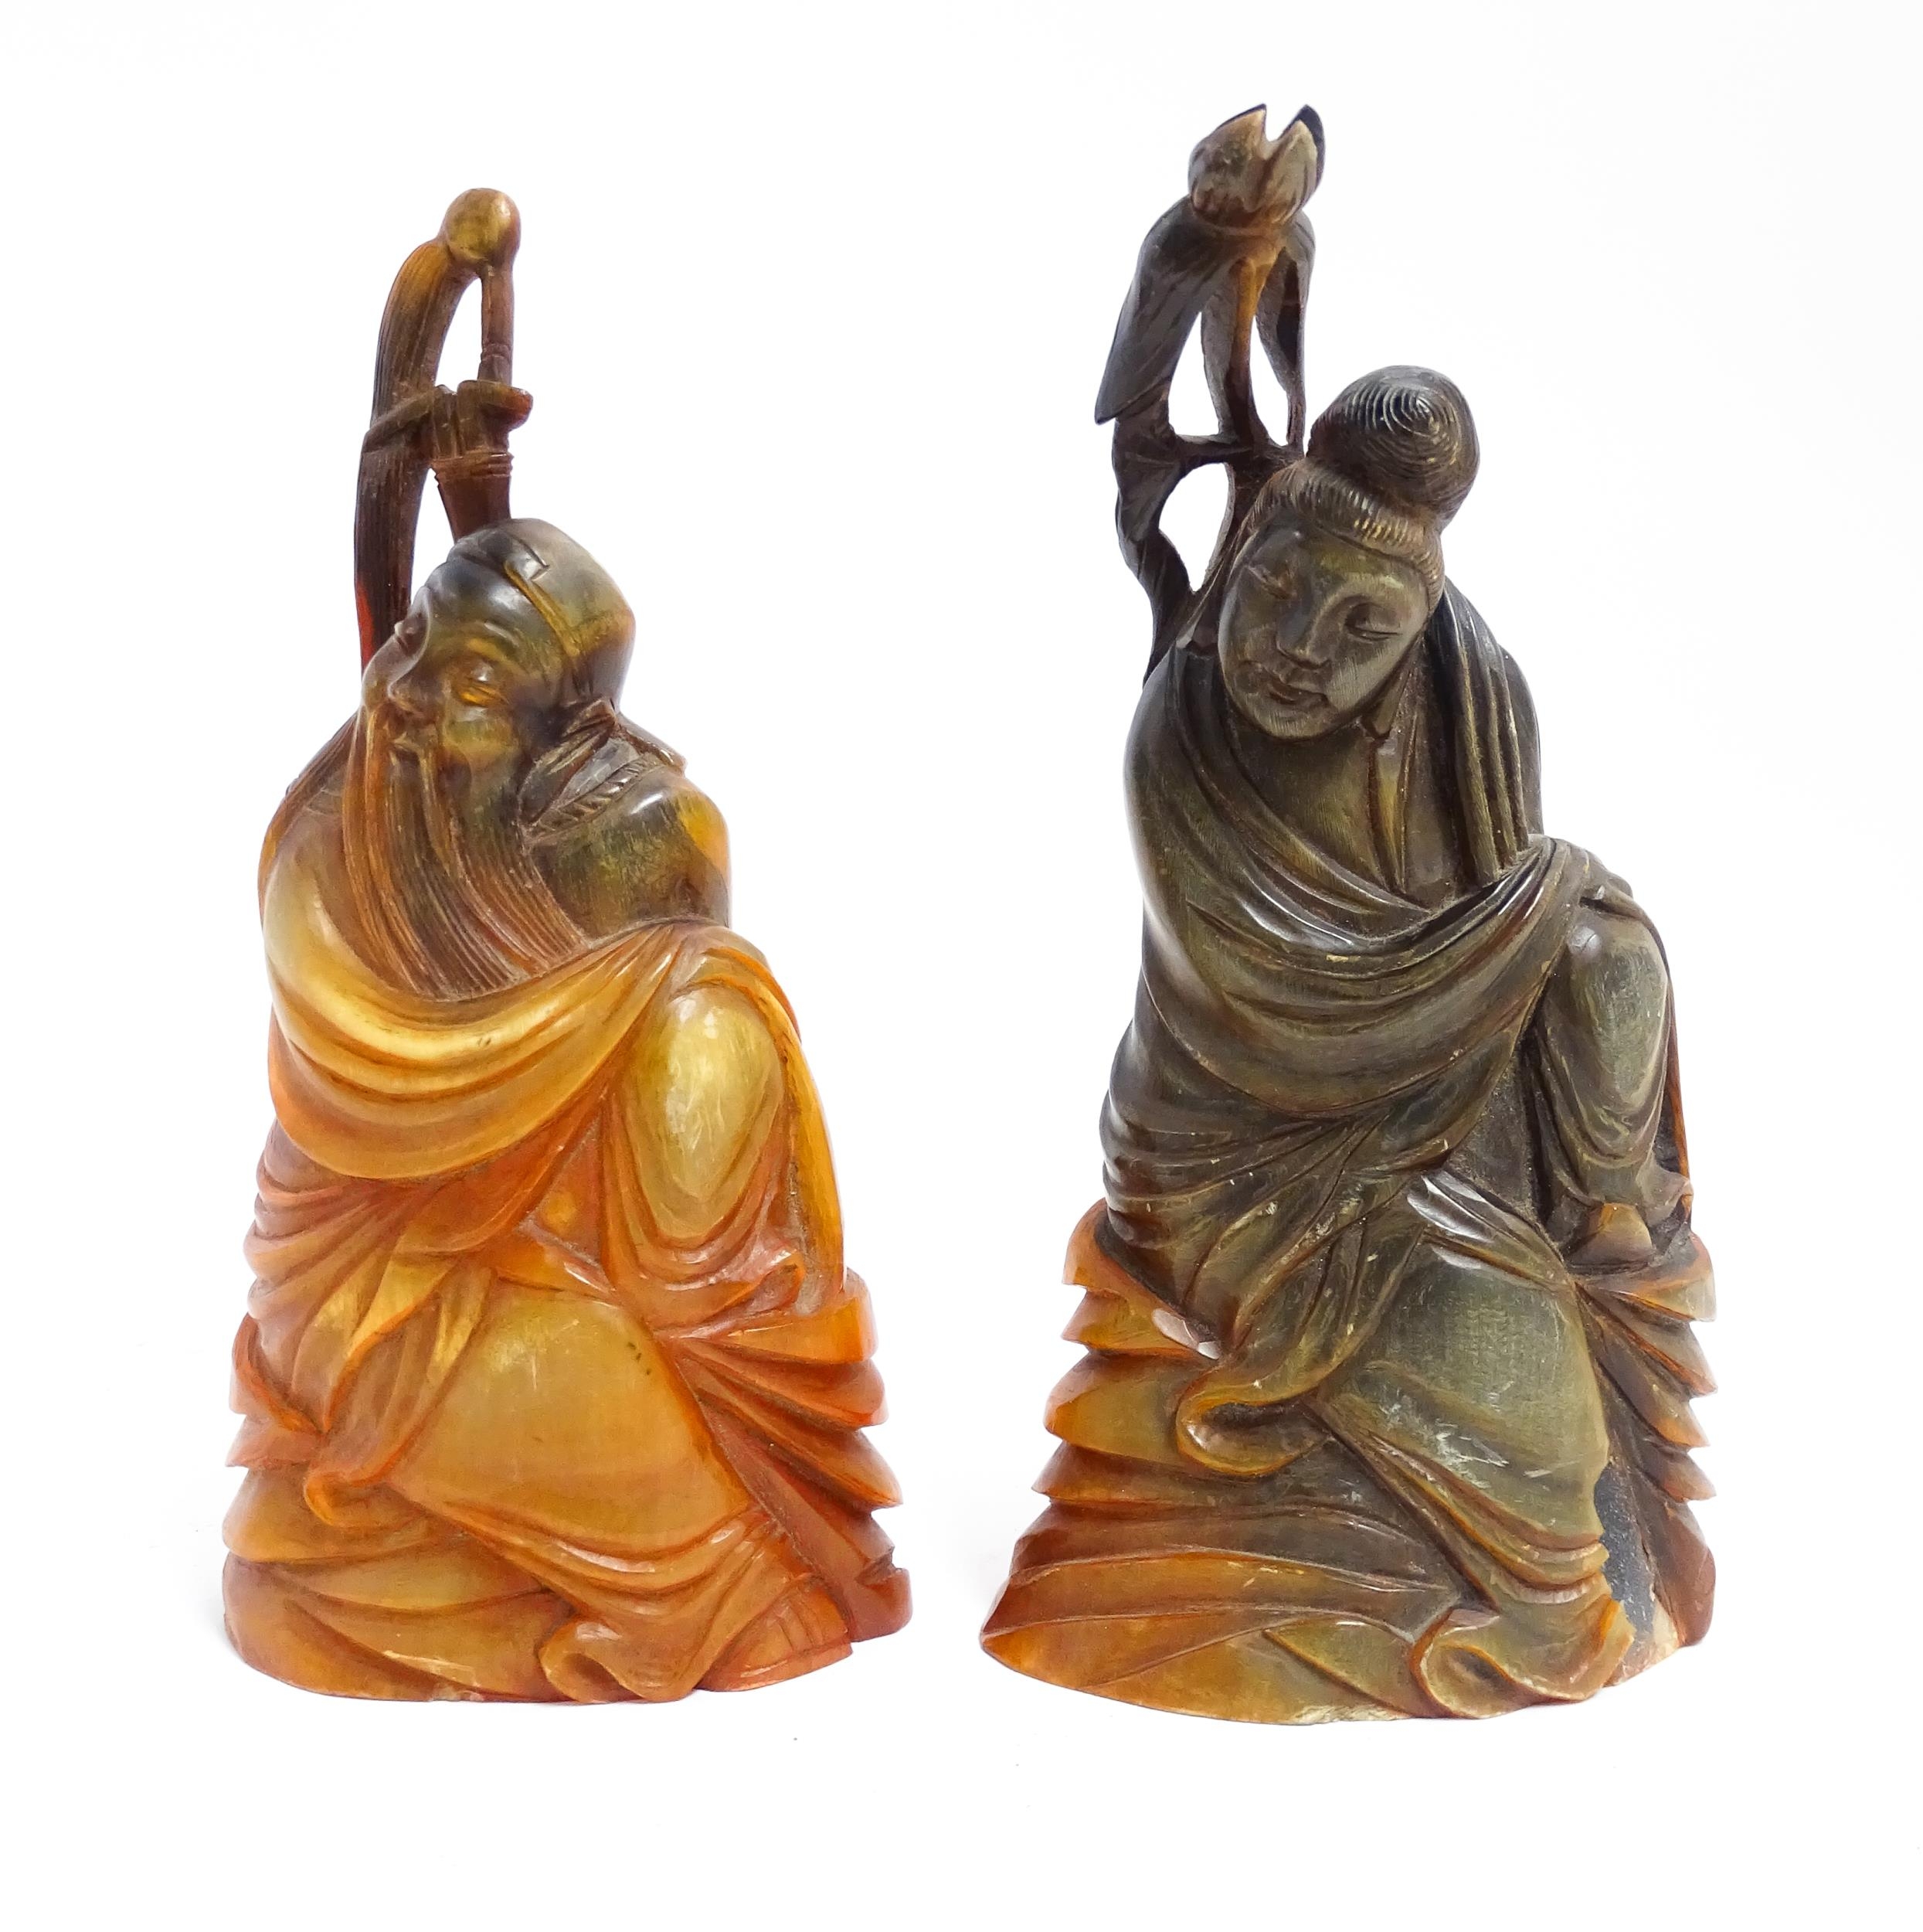 Two Chinese horn carvings depicting a sage figure and a deity figure. Largest approx. 6 1/4" high (